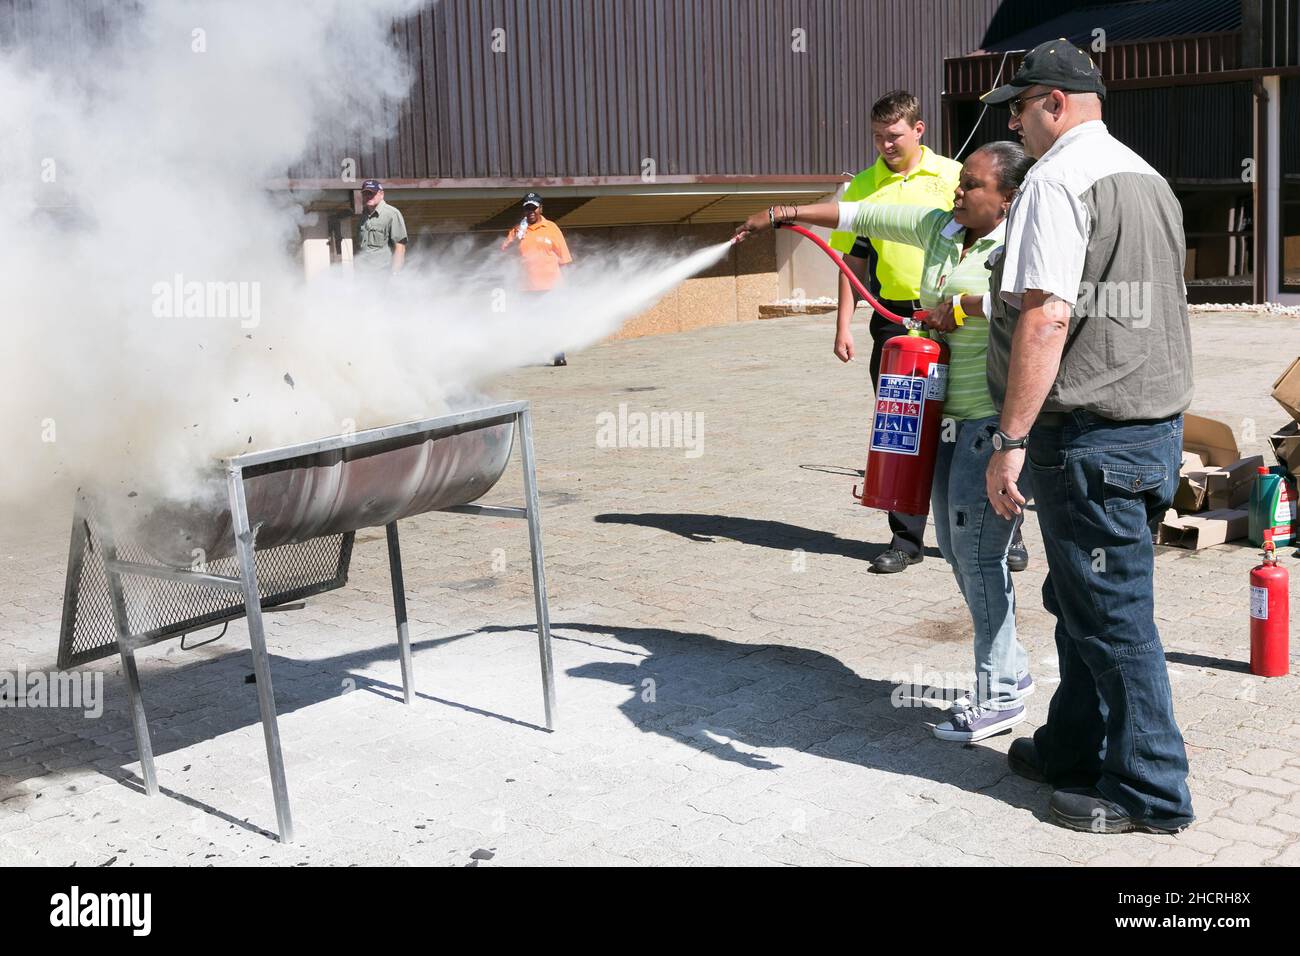 Process of fire hazard training with a powder-based extinguisher Stock Photo